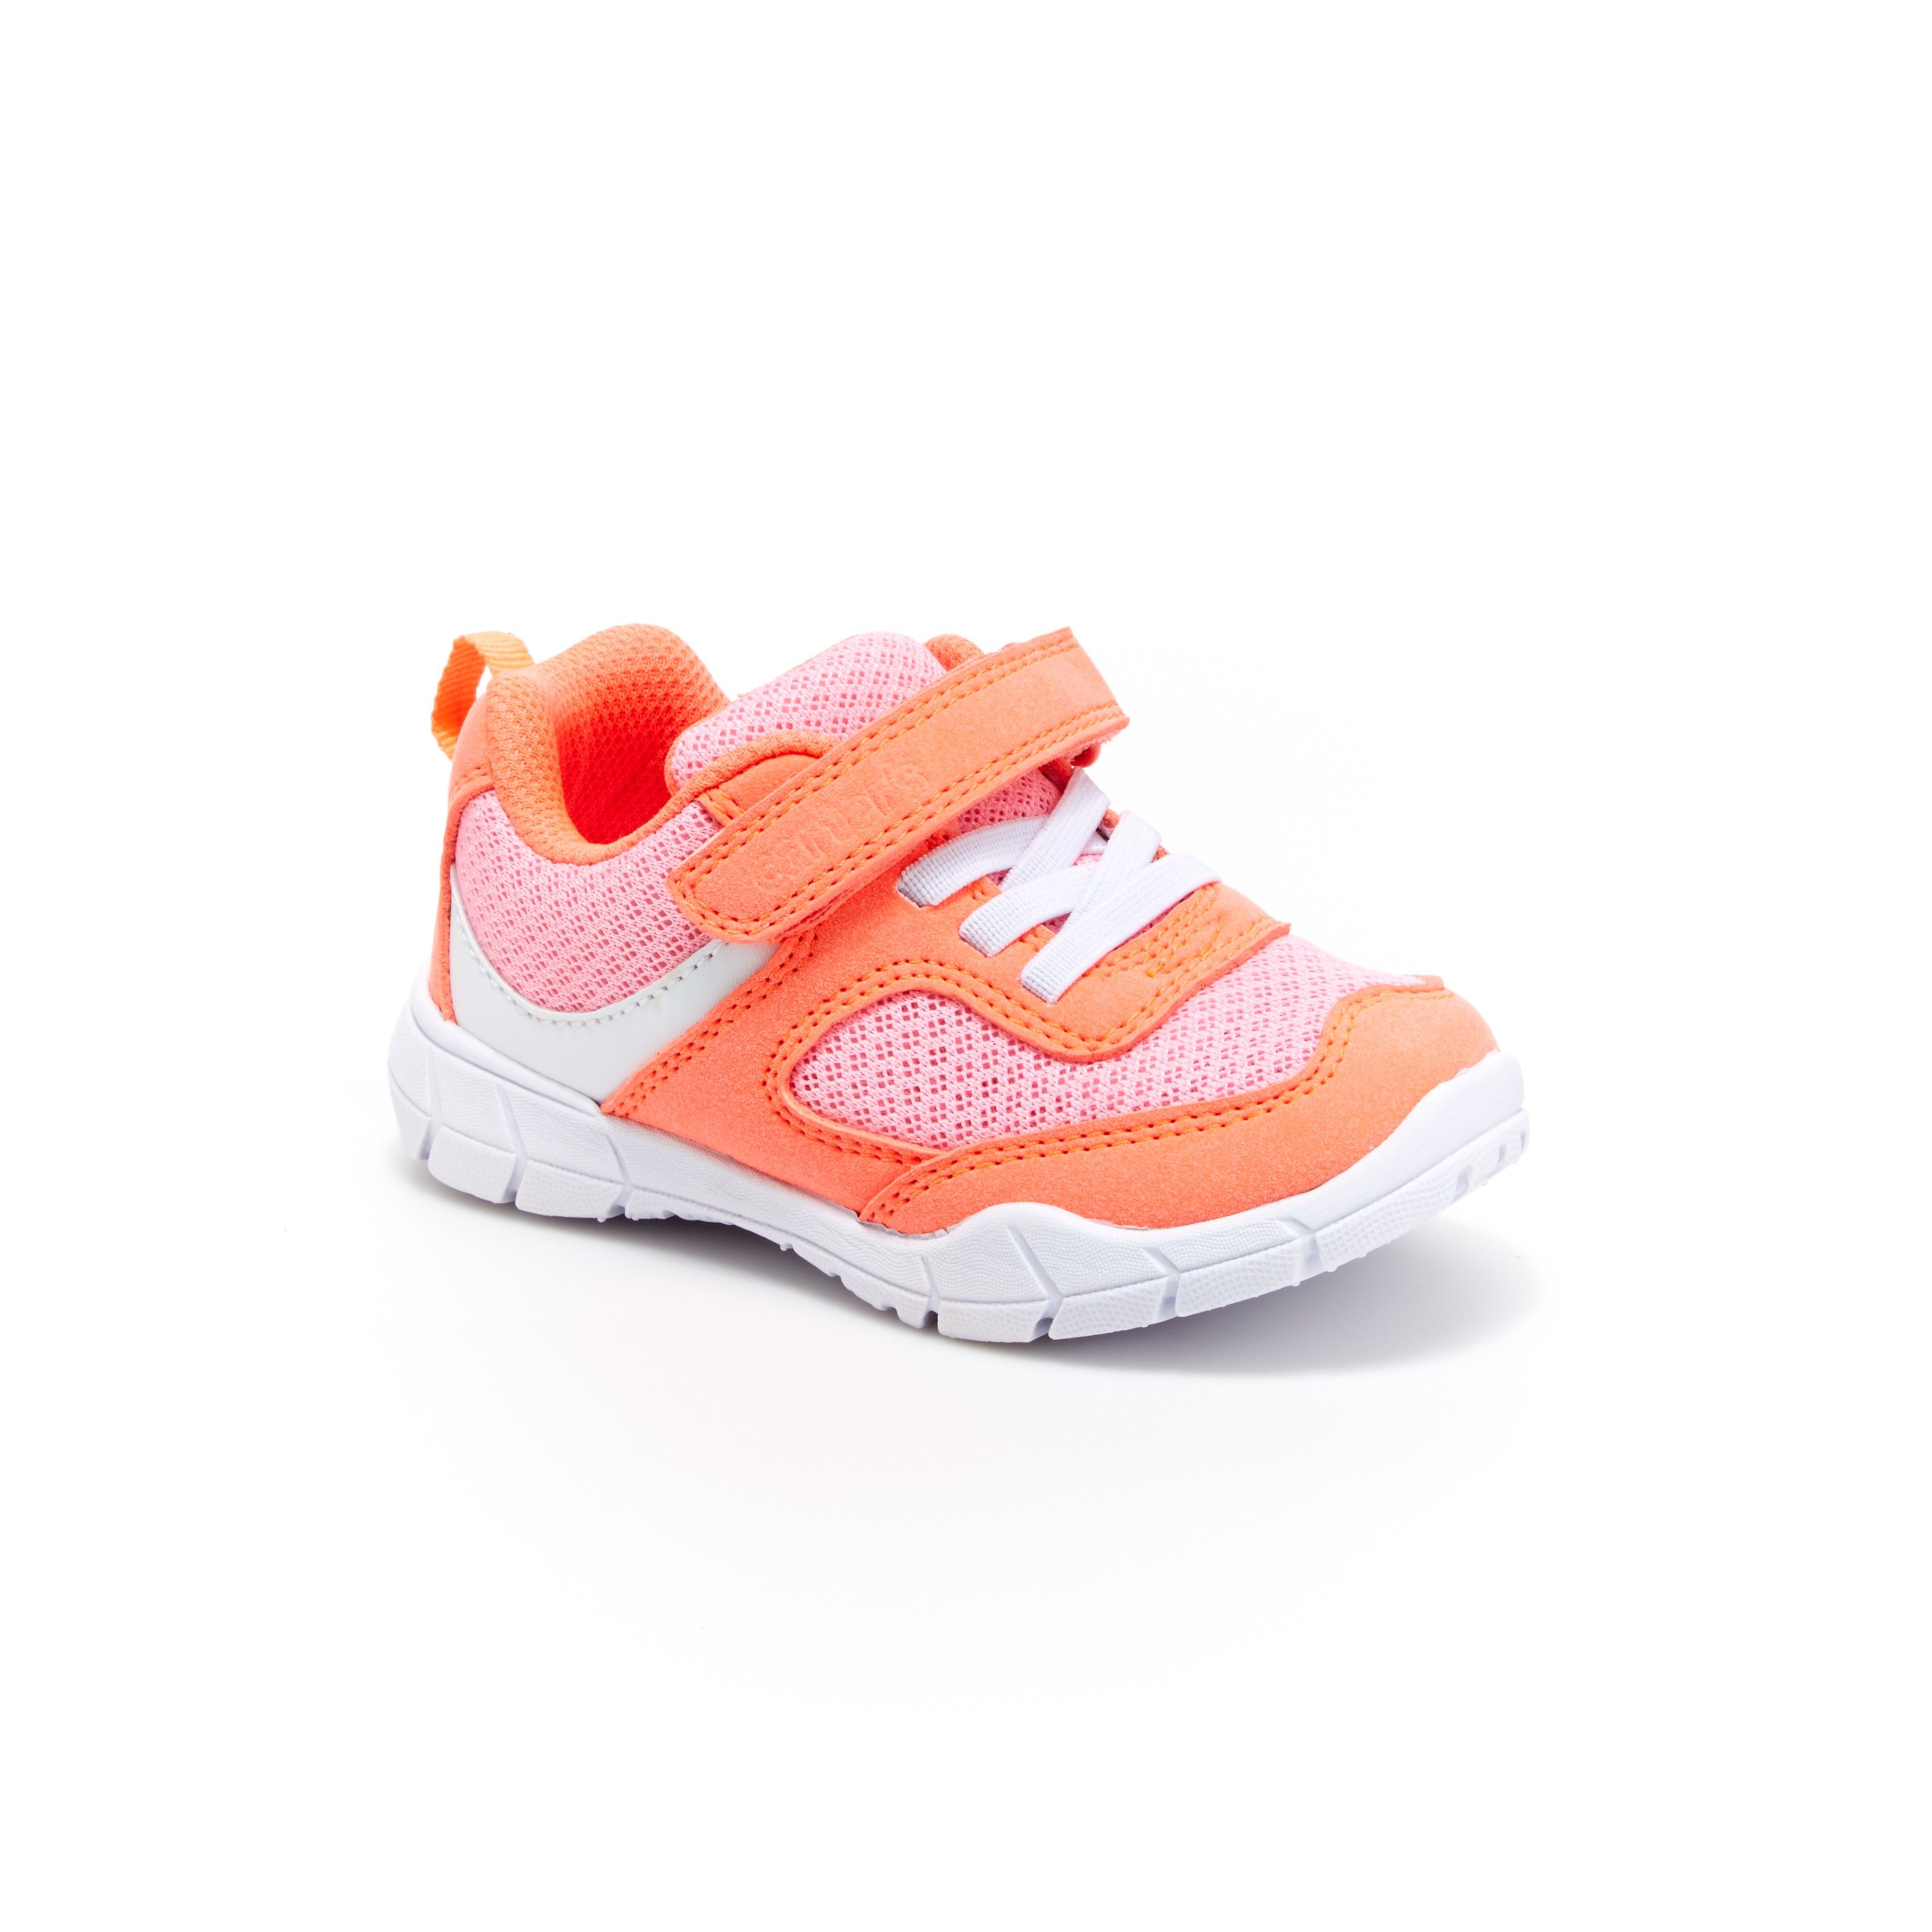 neon pink running shoes